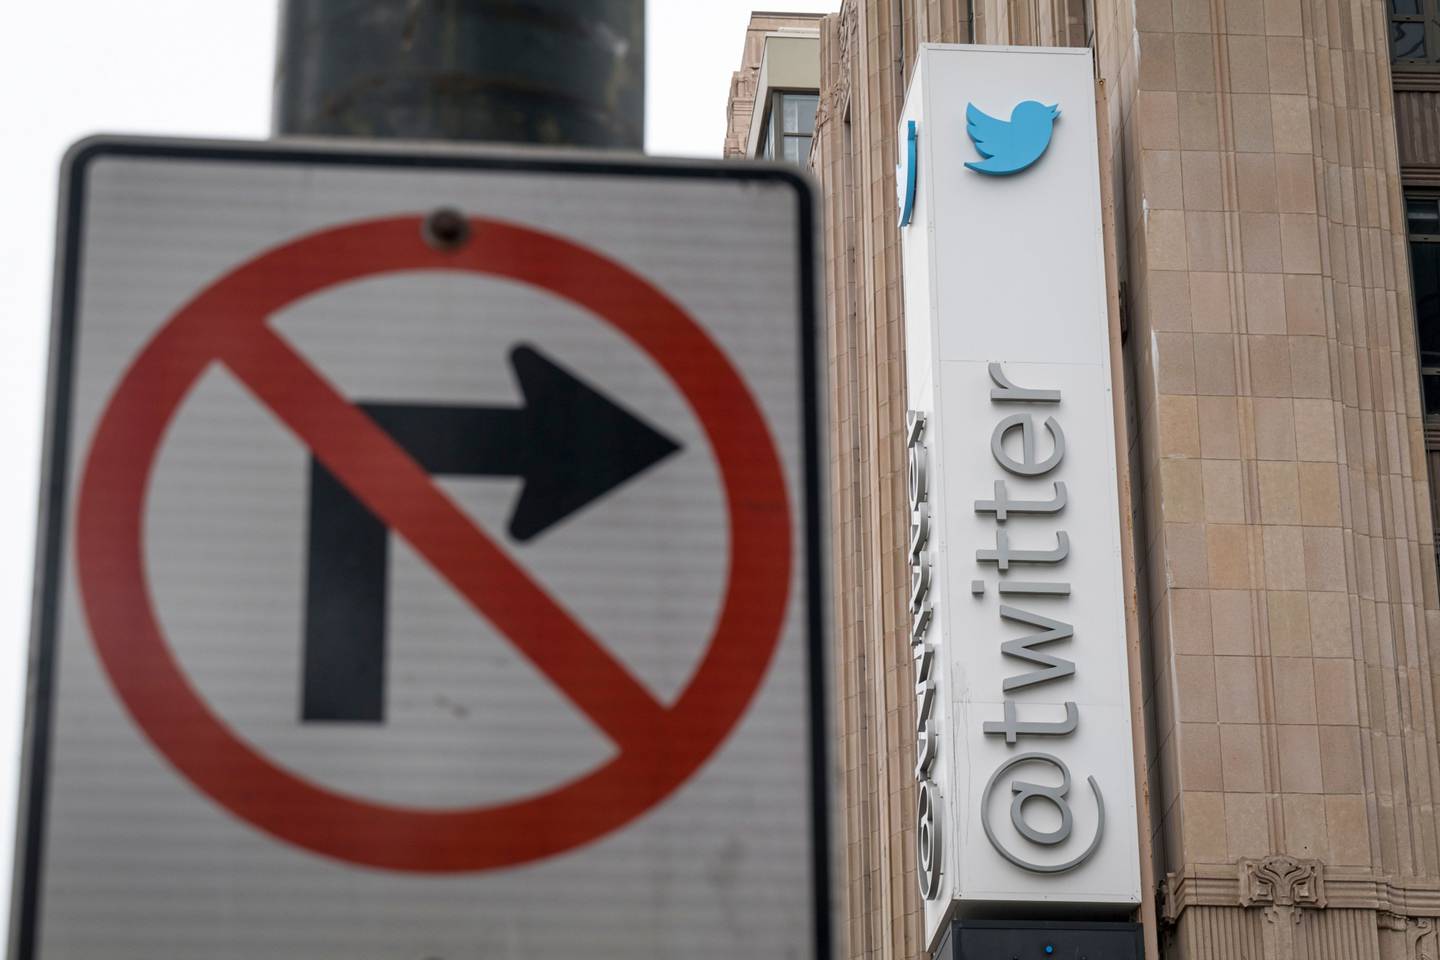 Twitter has lost customers who were bringing in hundreds of millions of dollars in advertising.